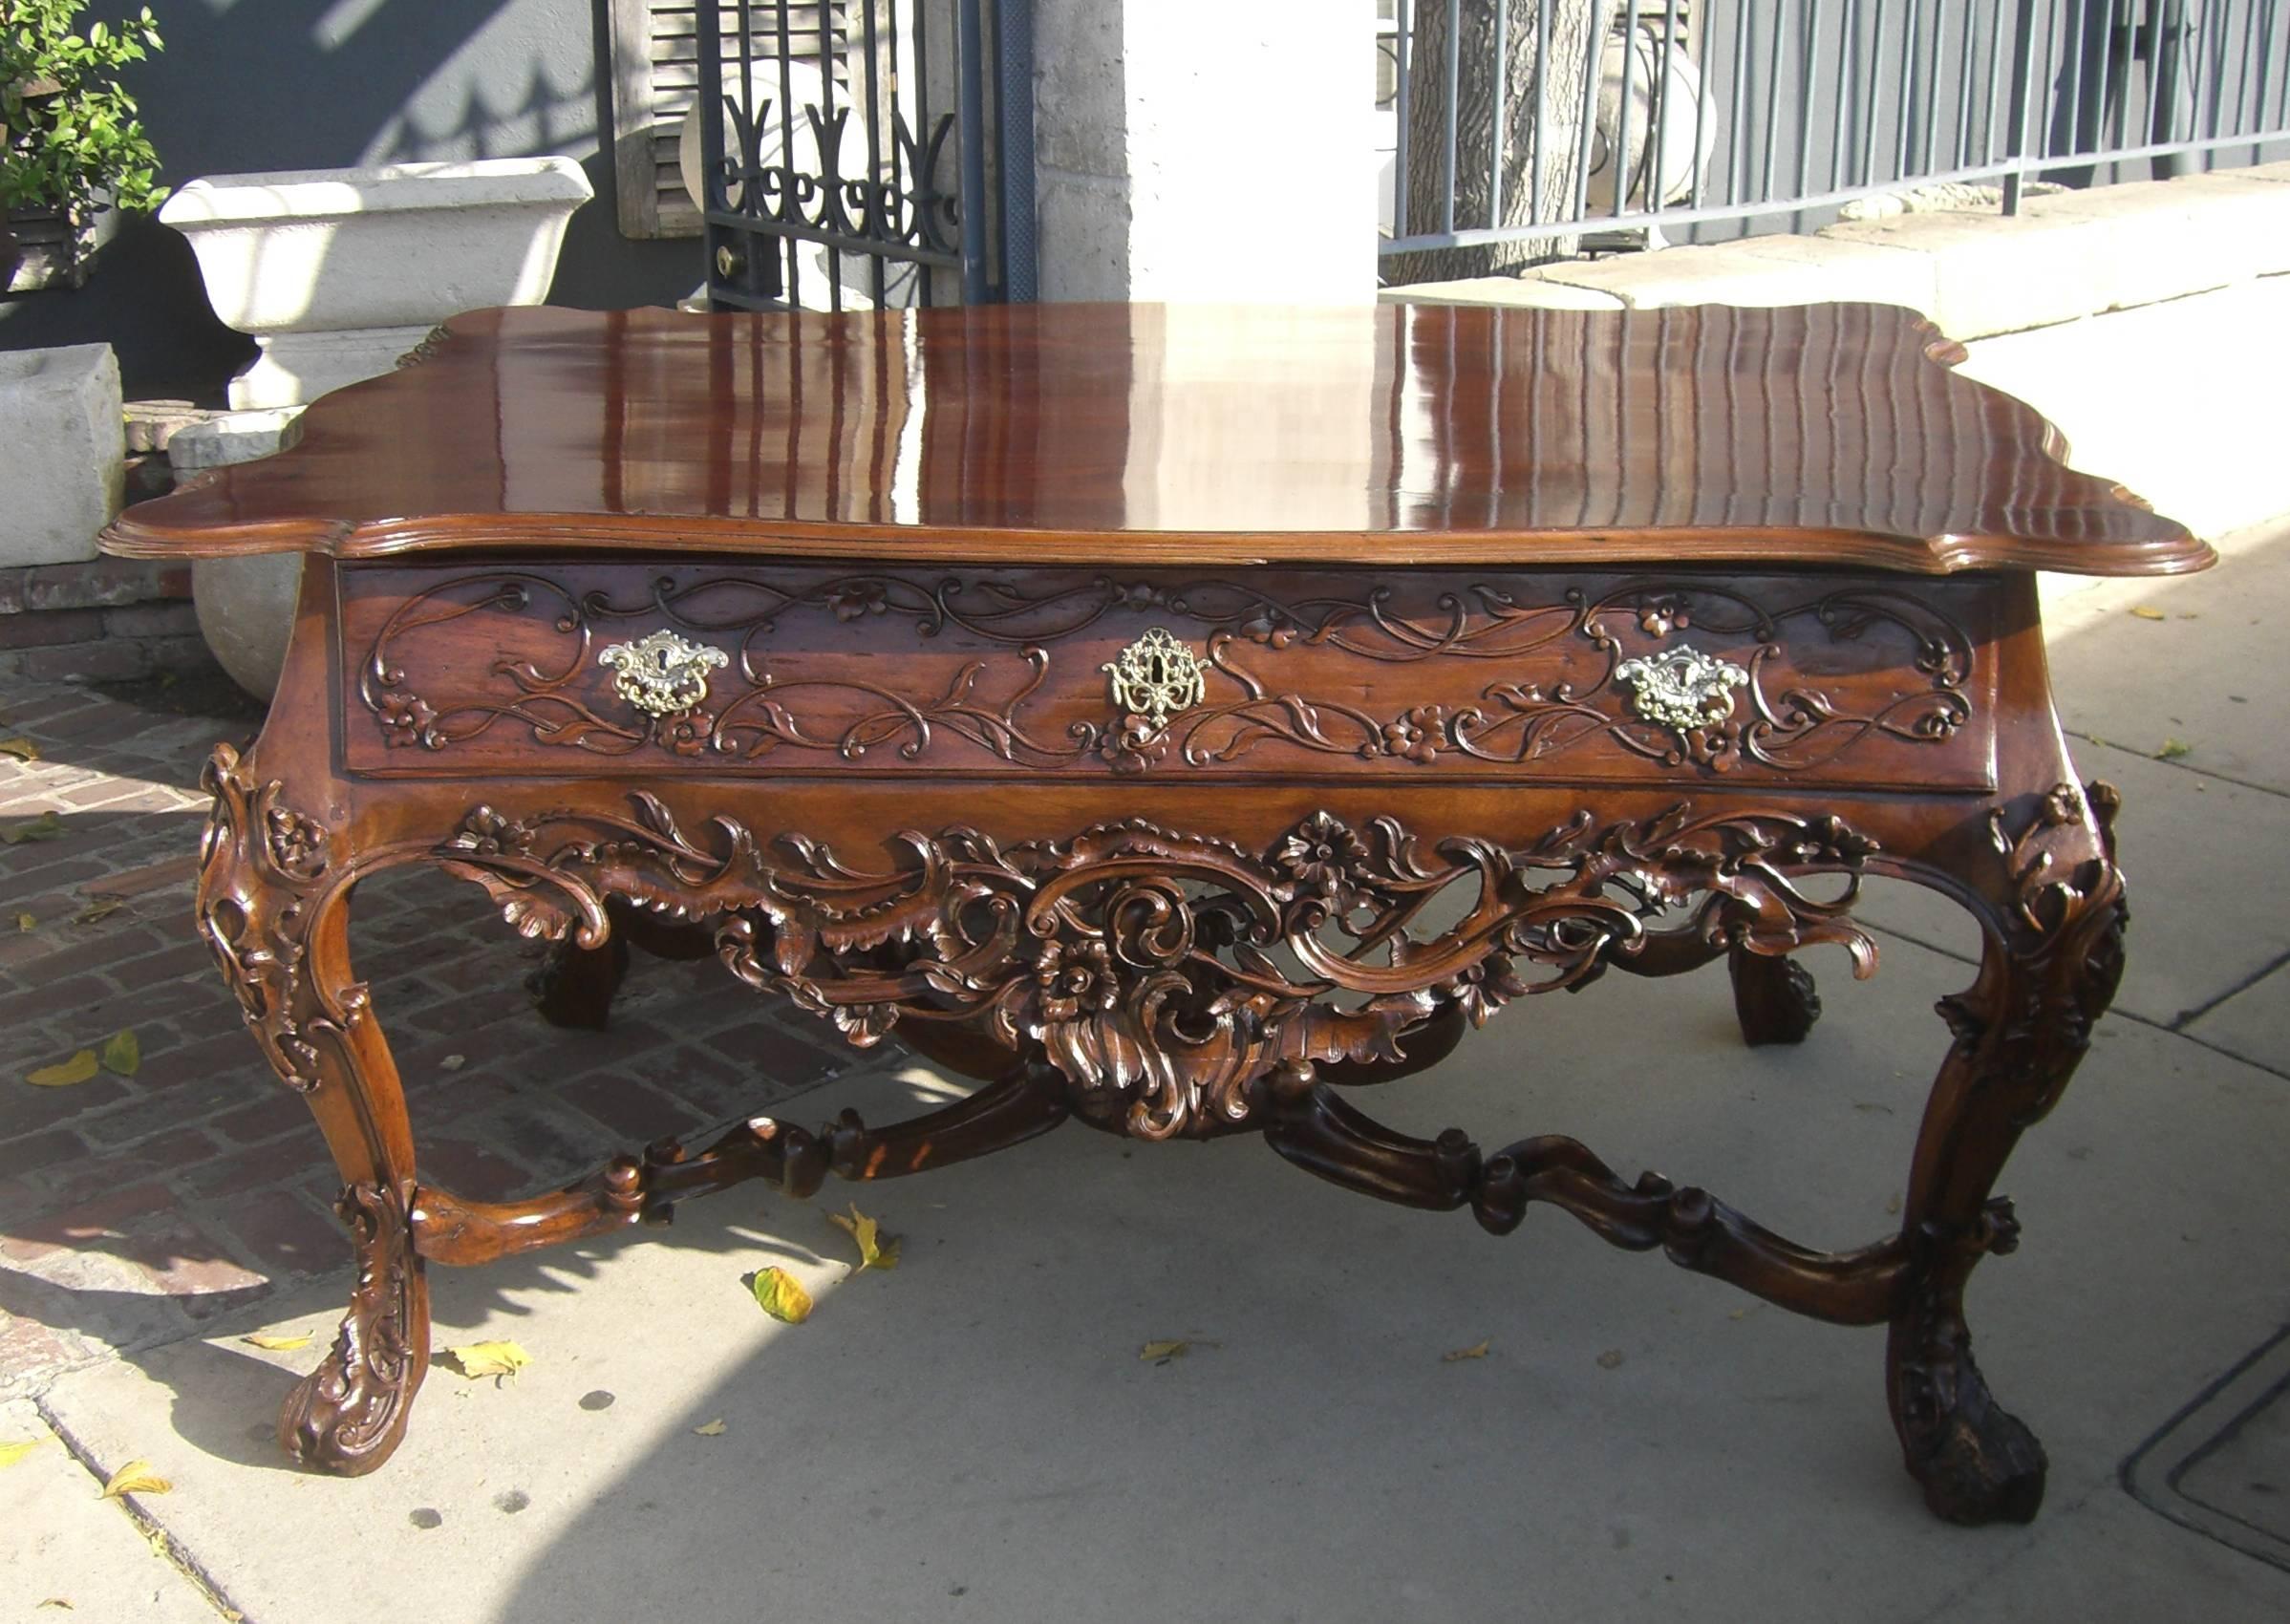 18th C. Portuguese Grand carved Hardwood Library Table Entry center Antiques LA . This rare amazing Portuguese late 18th century center hall library table was part of the Estate of Maria Felix.
María de los Ángeles Félix Güereña was a Mexican film